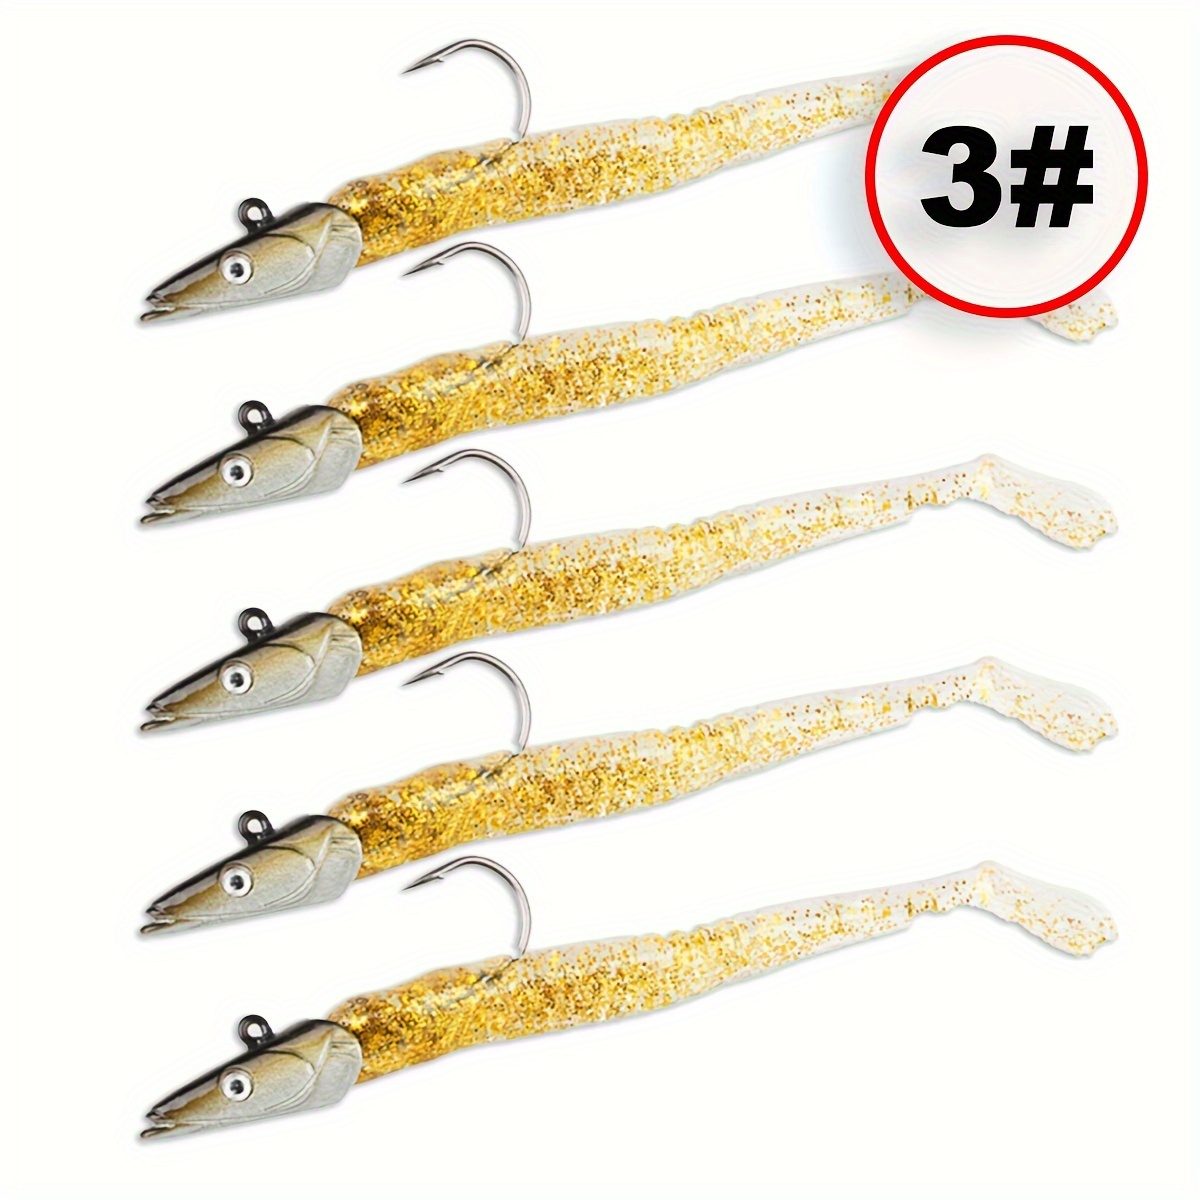 Dr.Fish 8 Pack Soft Lures Paddle Tail Swimbaits, 2.5 Inches Minnow